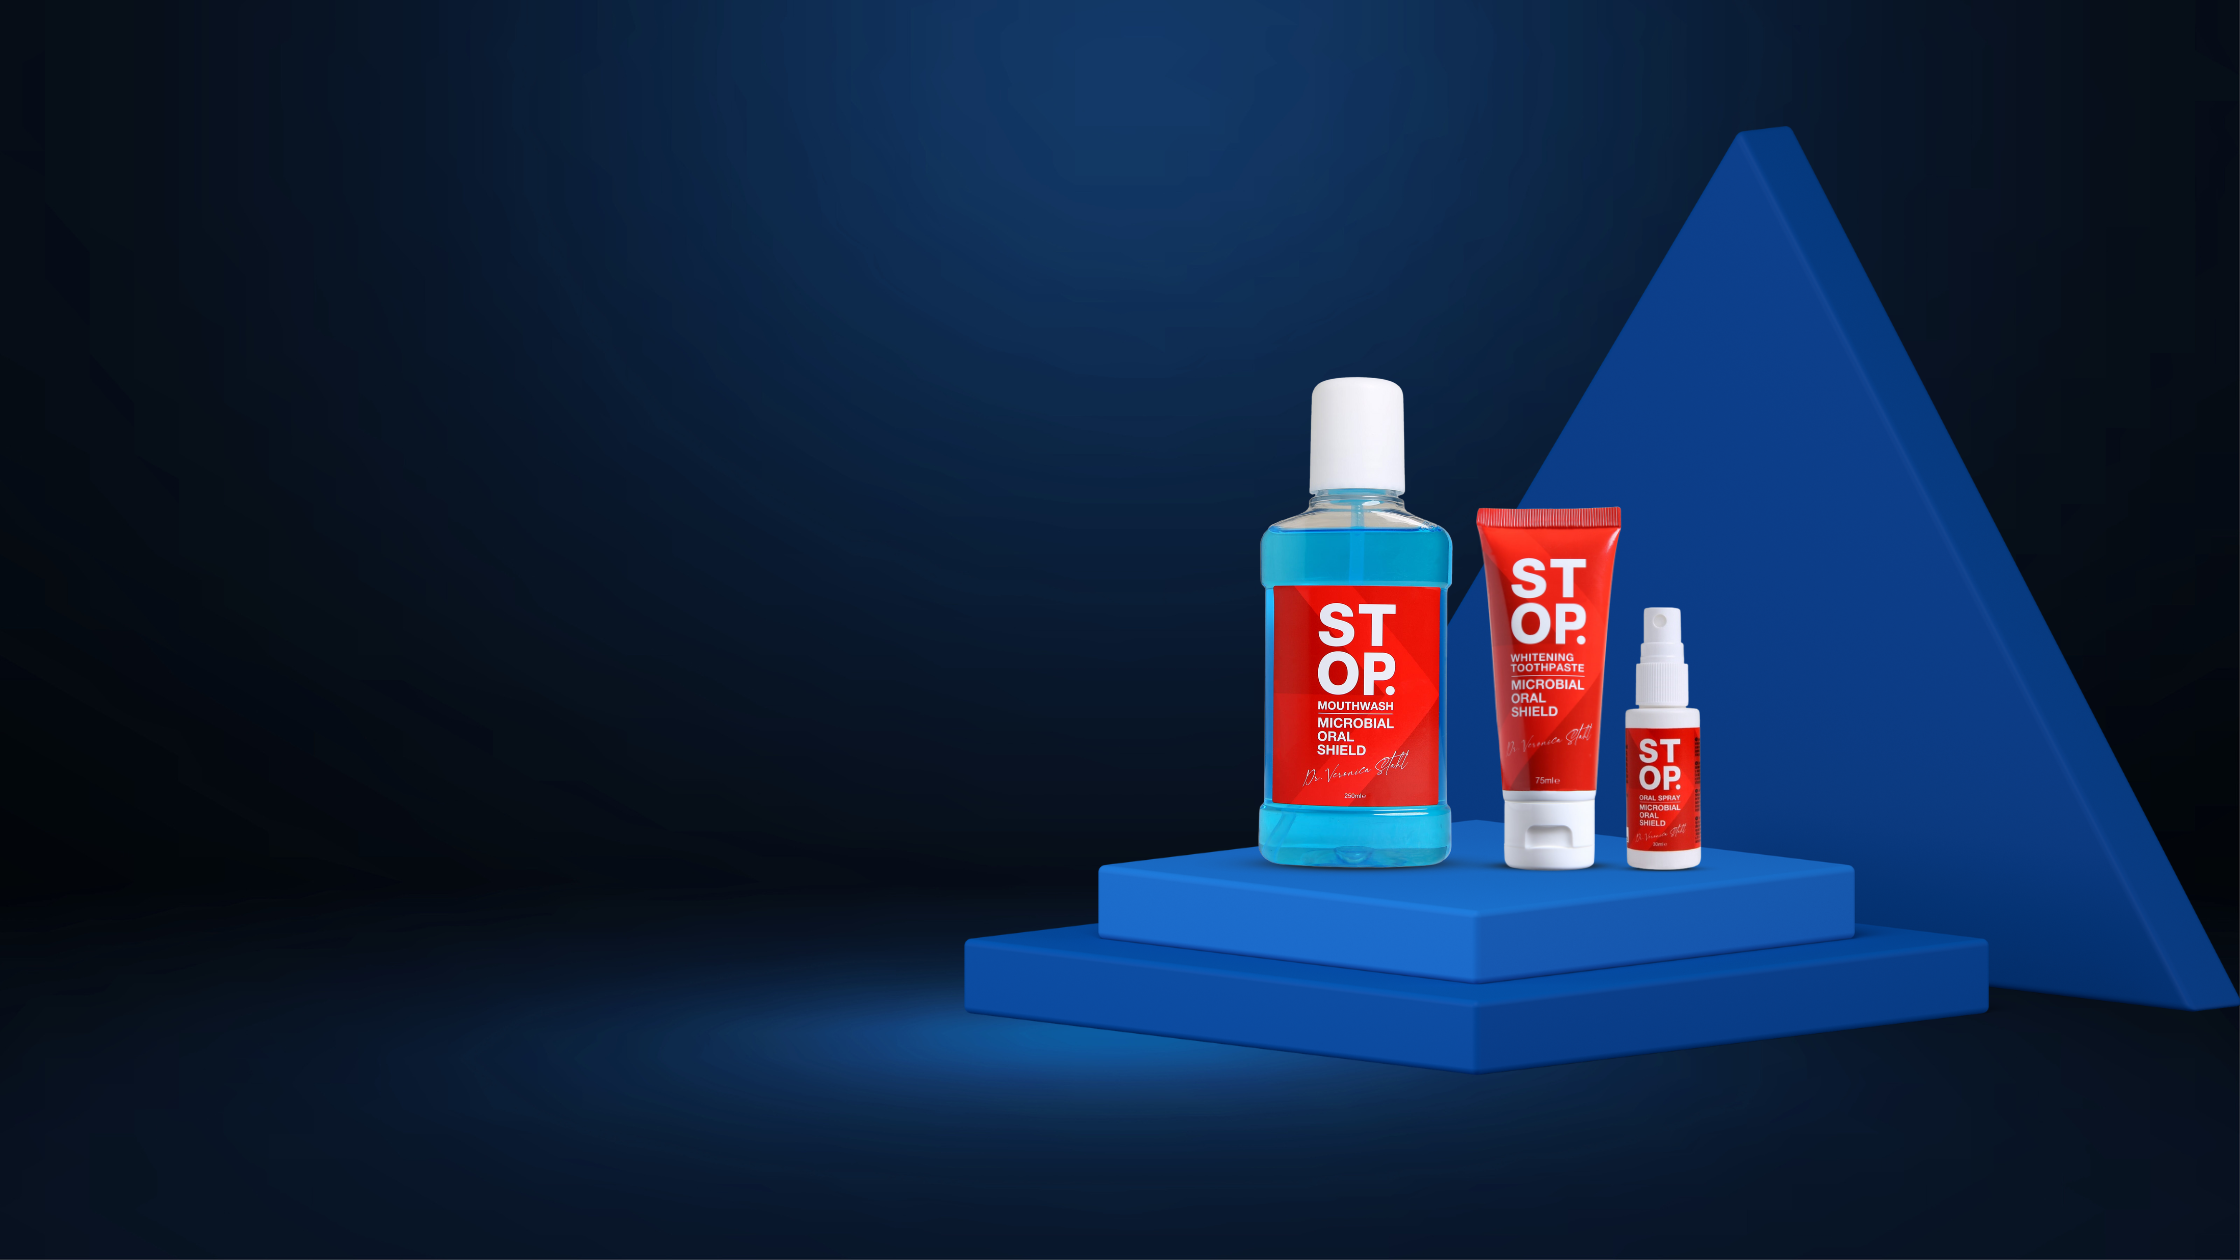 Dynamic presentation of STOP oral care range, featuring a blue 'Mouthwash with Microbial Oral Shield', a 'Whitening Toothpaste', and an 'Oral Spray'. These products are positioned on modern blue geometric platforms with a contrasting deep blue gradient background. 